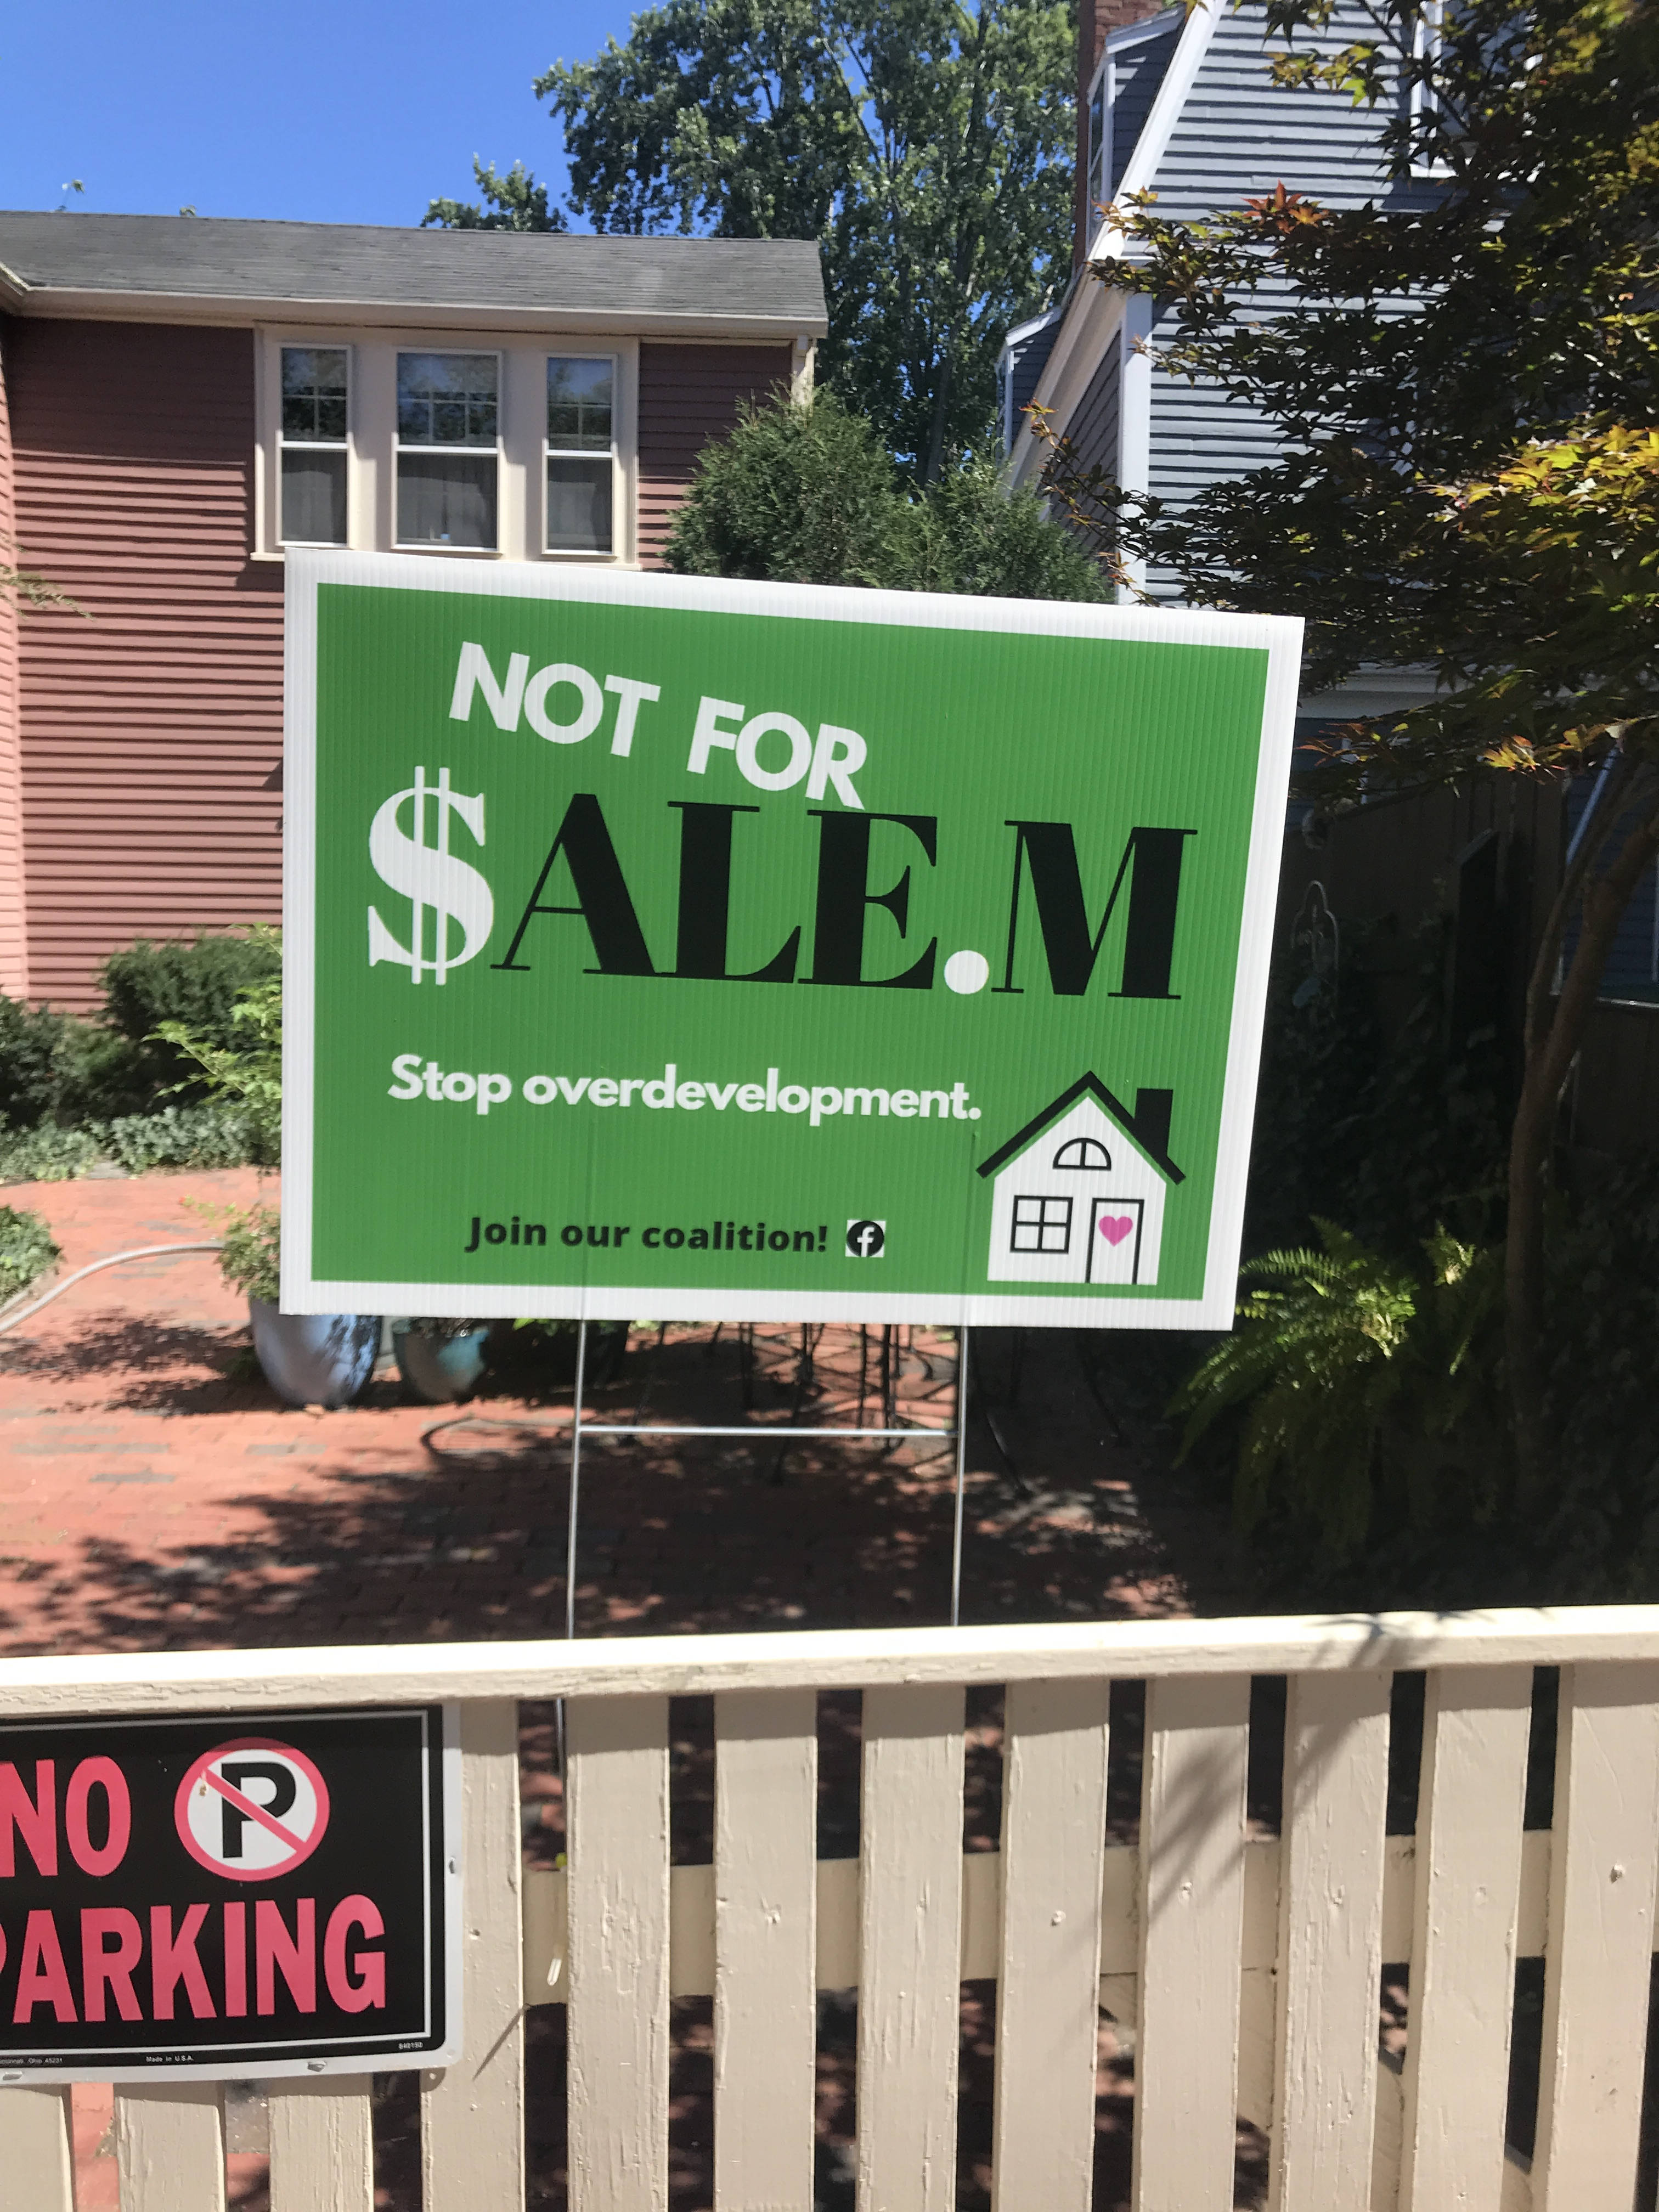 A cream-colored fence in front of an antique home. The fence bears a 'No Parking' sign and one of the 'Not For $alem' signs. The 'Not for $alem' sign says 'Stop Overdevelopment. Join our coalition!' and has a picture of a single-family house on it. The door of the house is decorated with a heart.